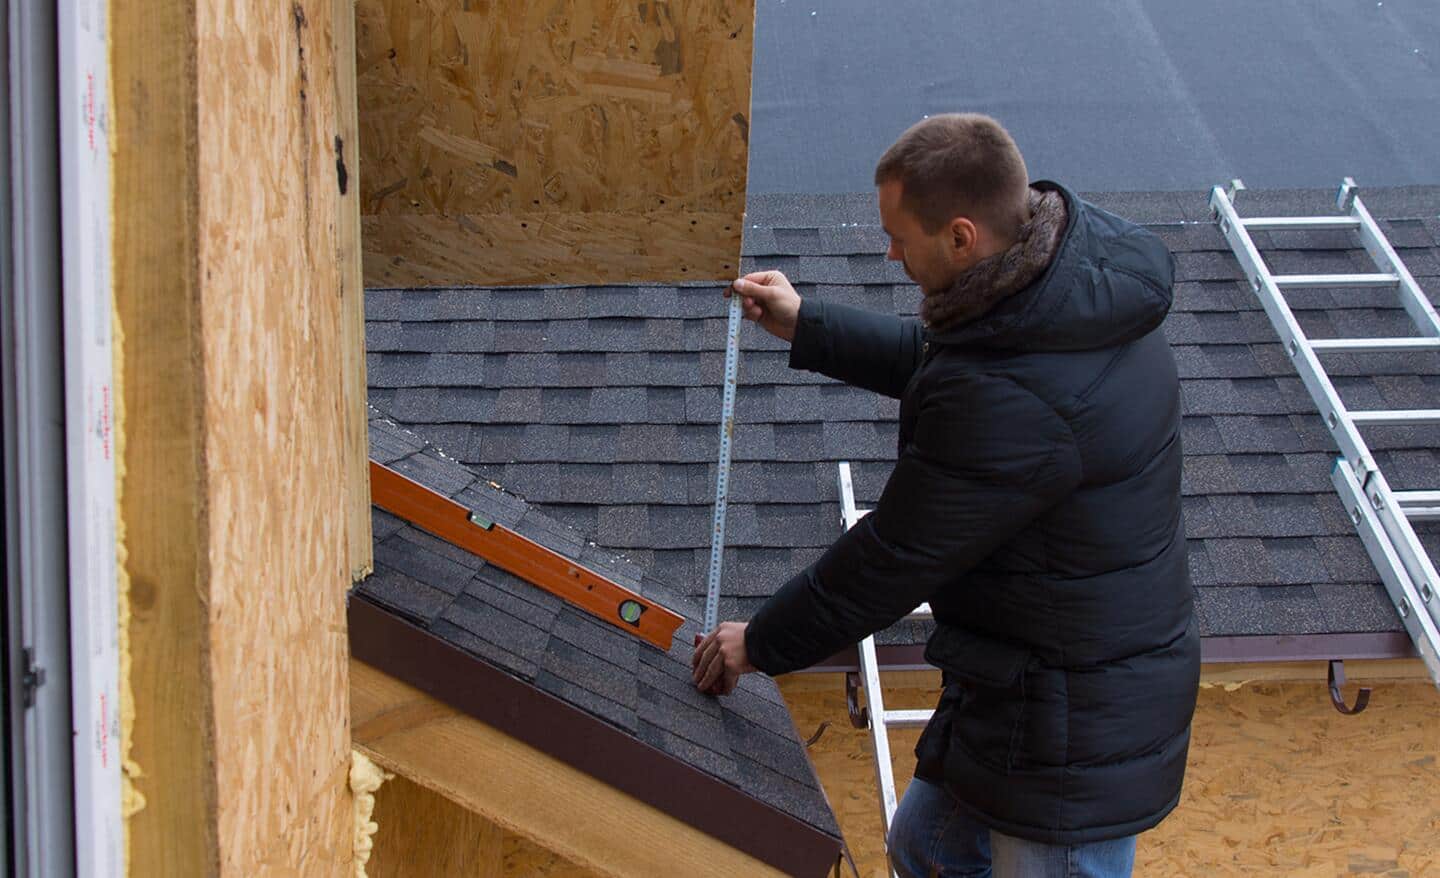 A person wearing a winter coat while measuring a roof.